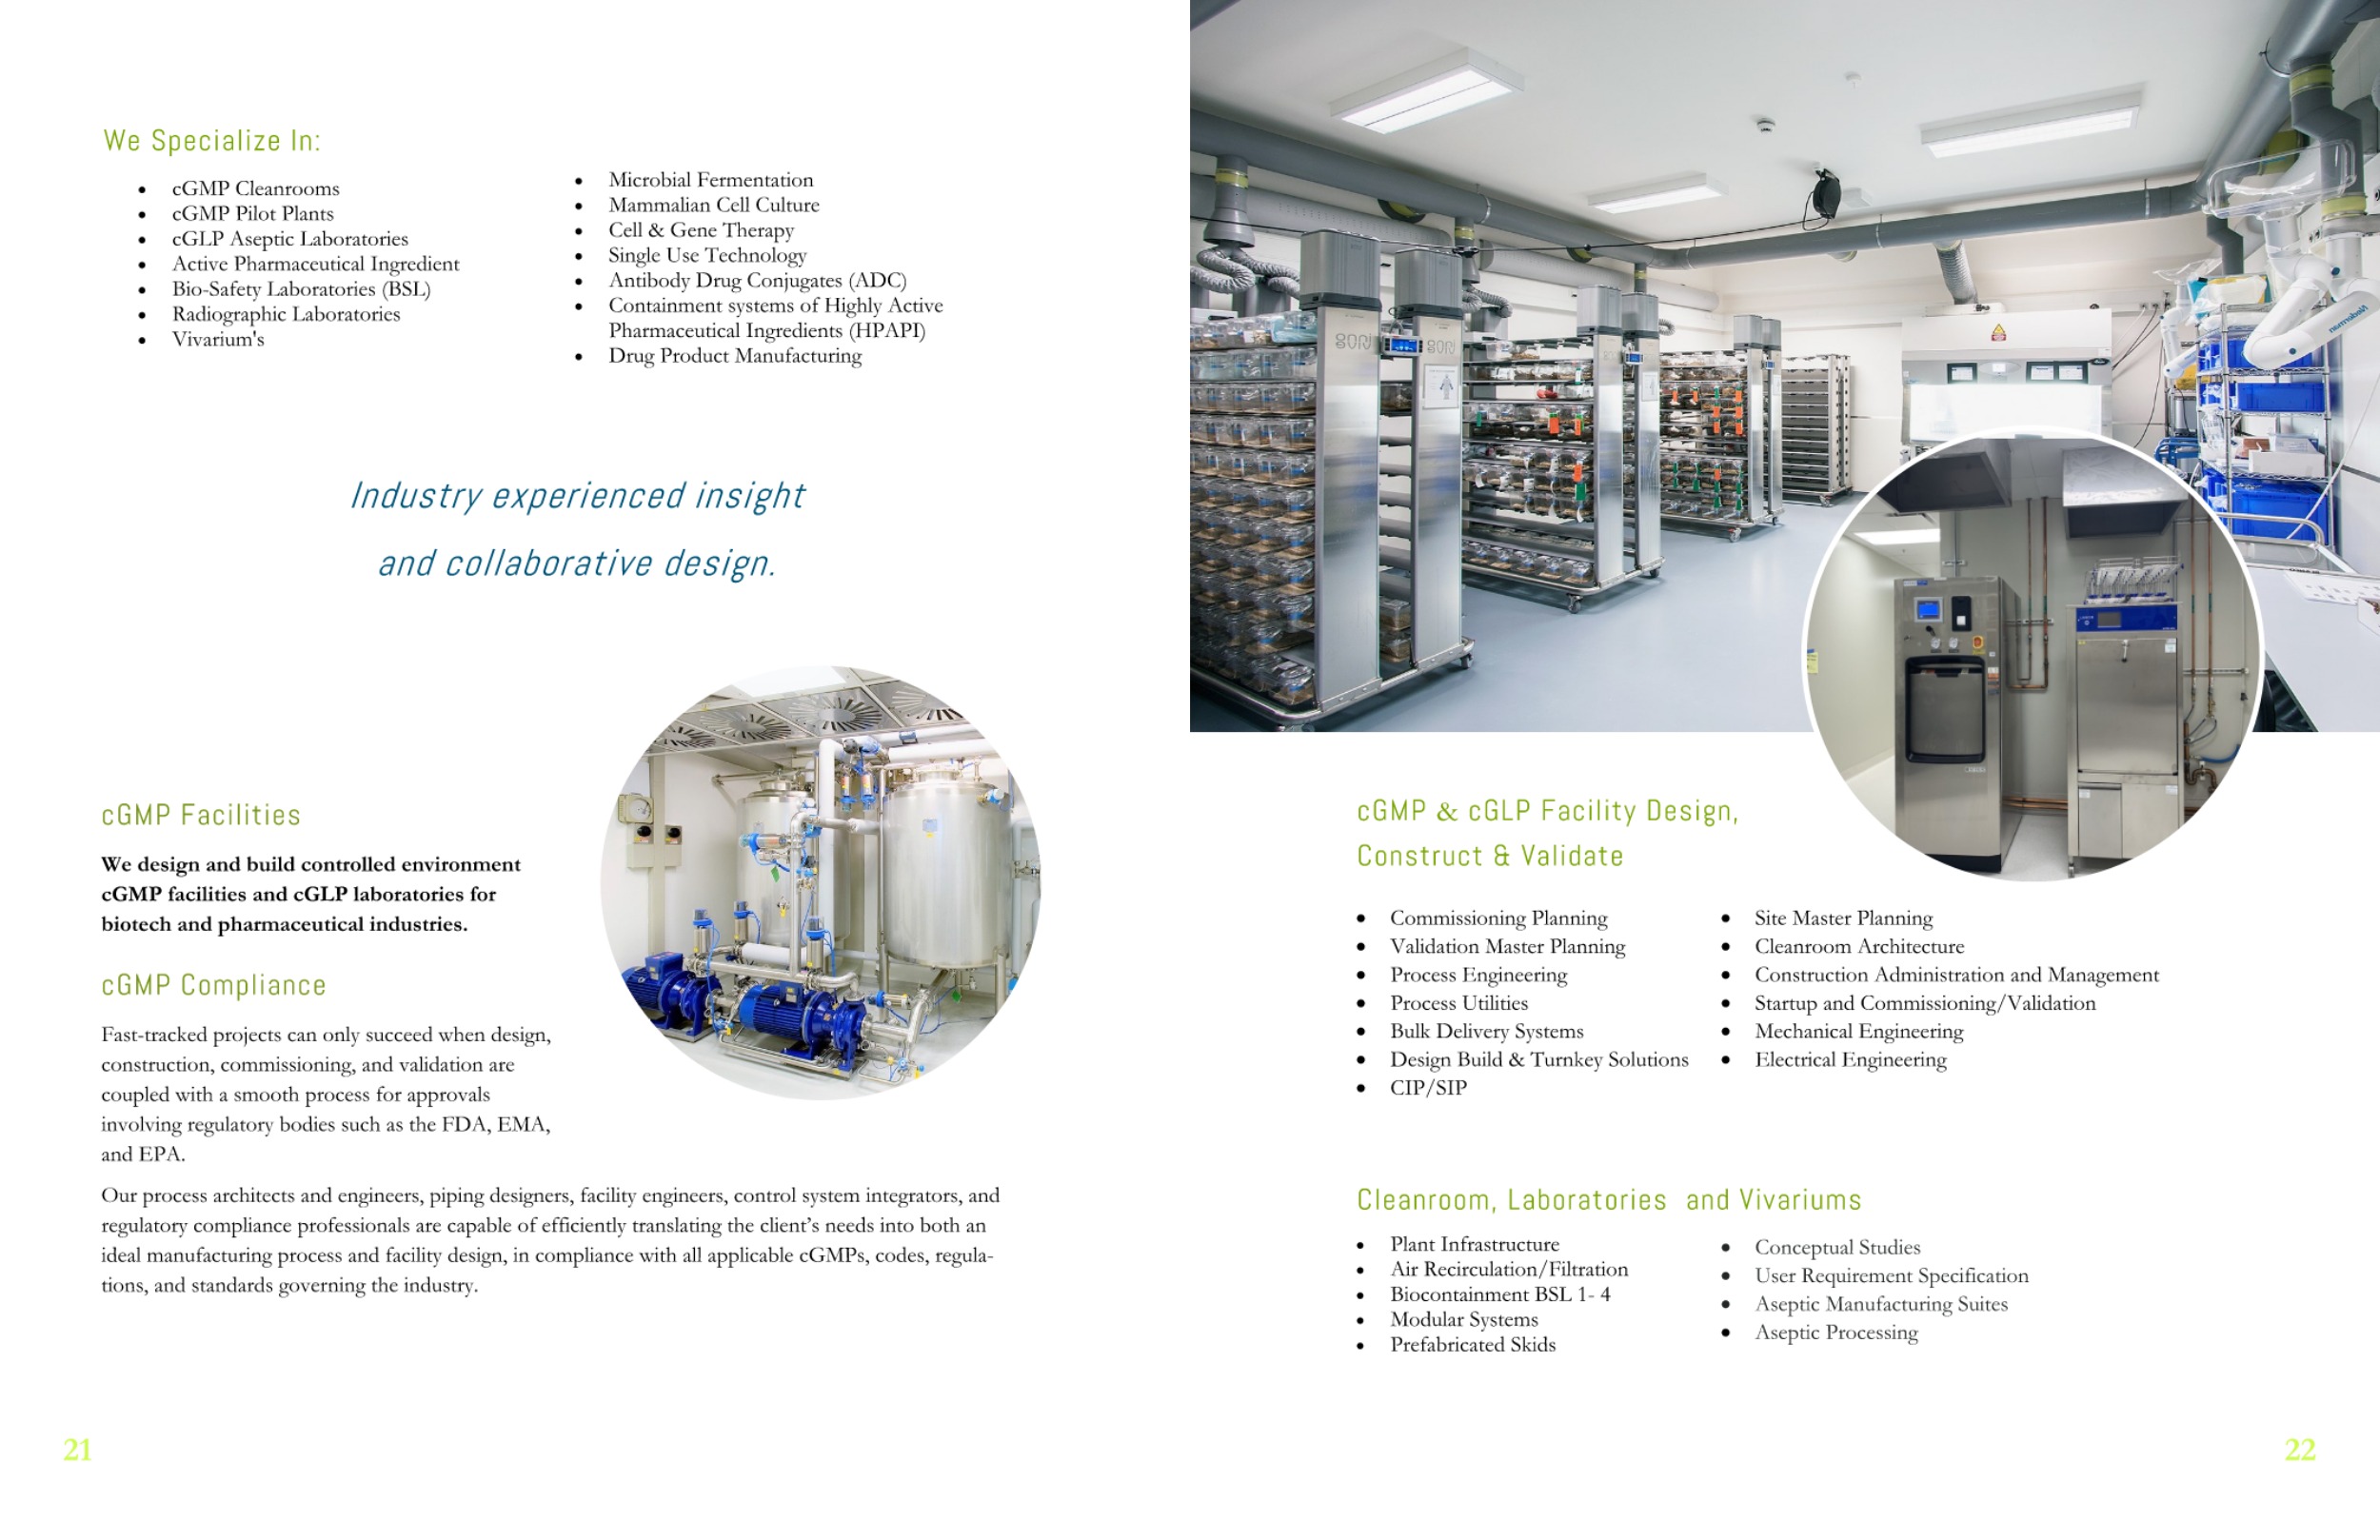 IPS Capabilities Booklet with cGMP services, capabilities, and methods.